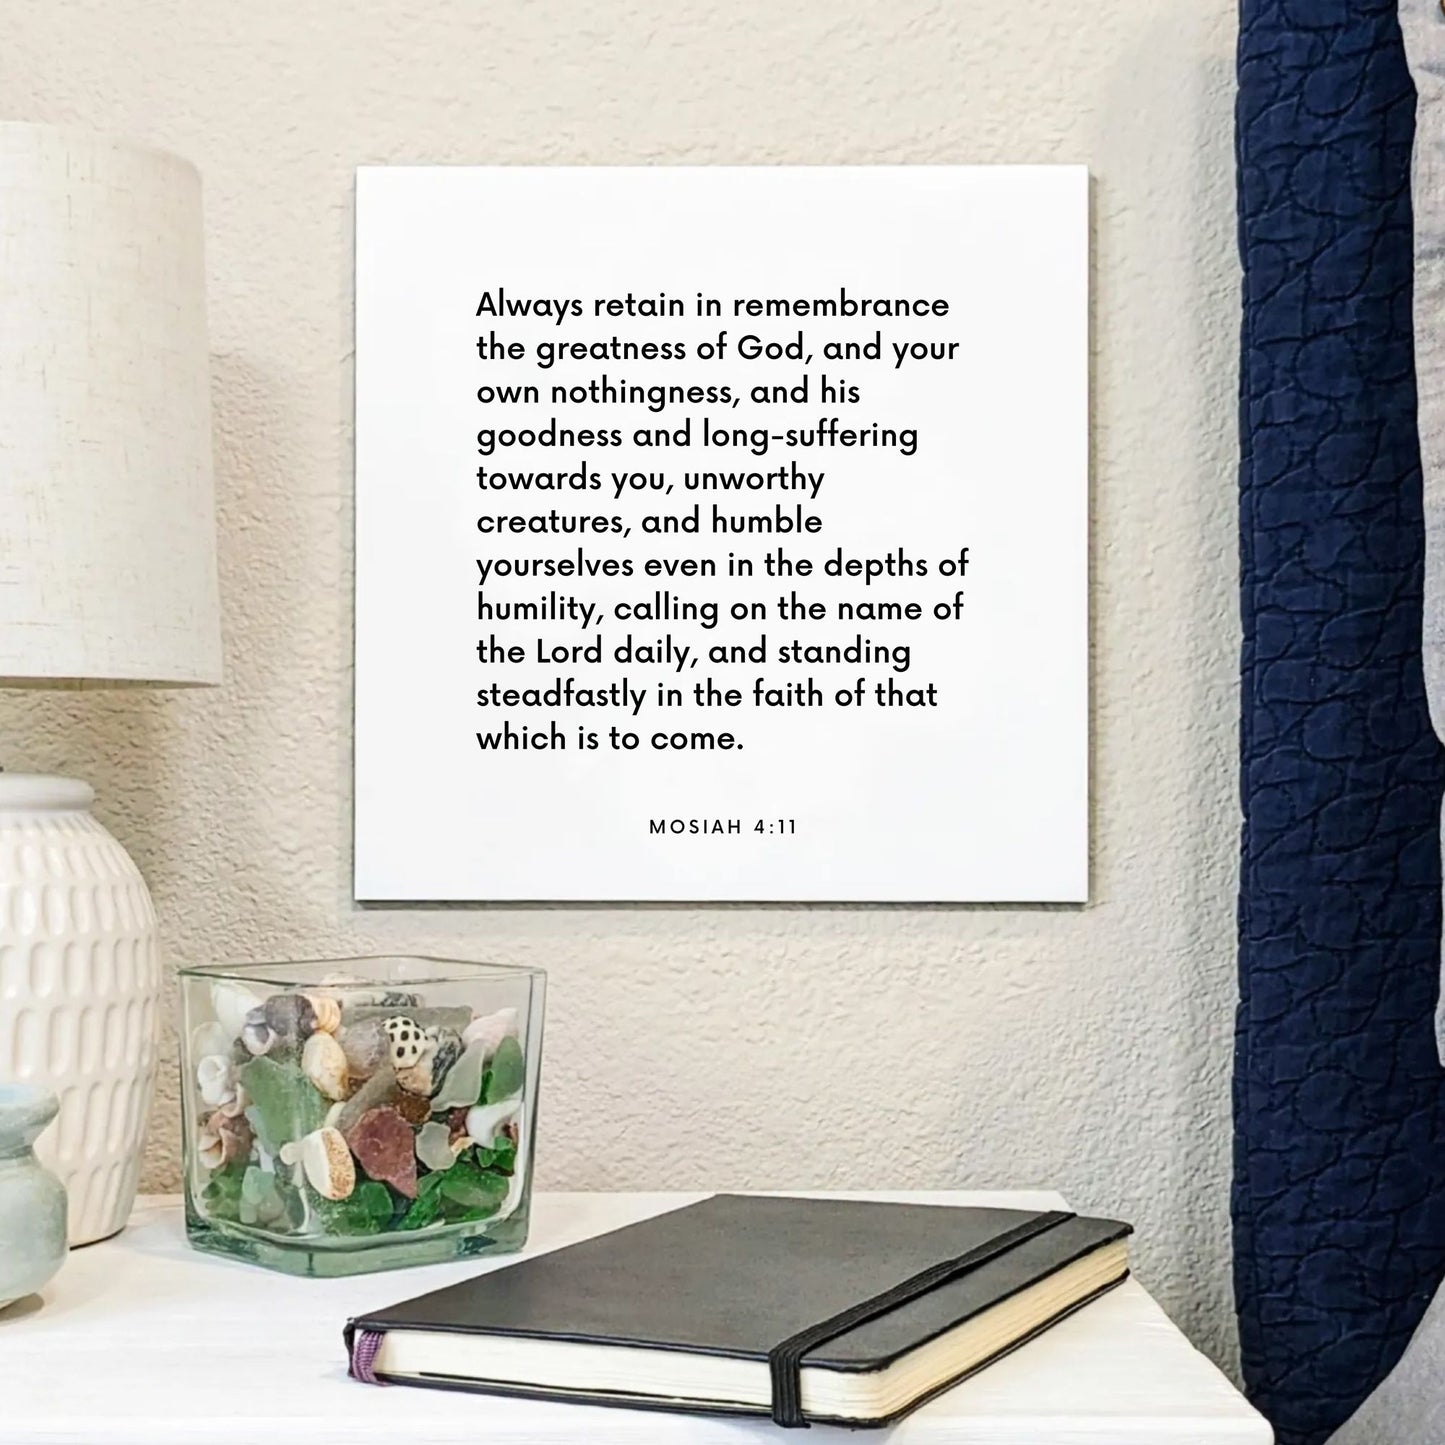 Bedside mouting of the scripture tile for Mosiah 4:11 - "Always retain in remembrance the greatness of God"